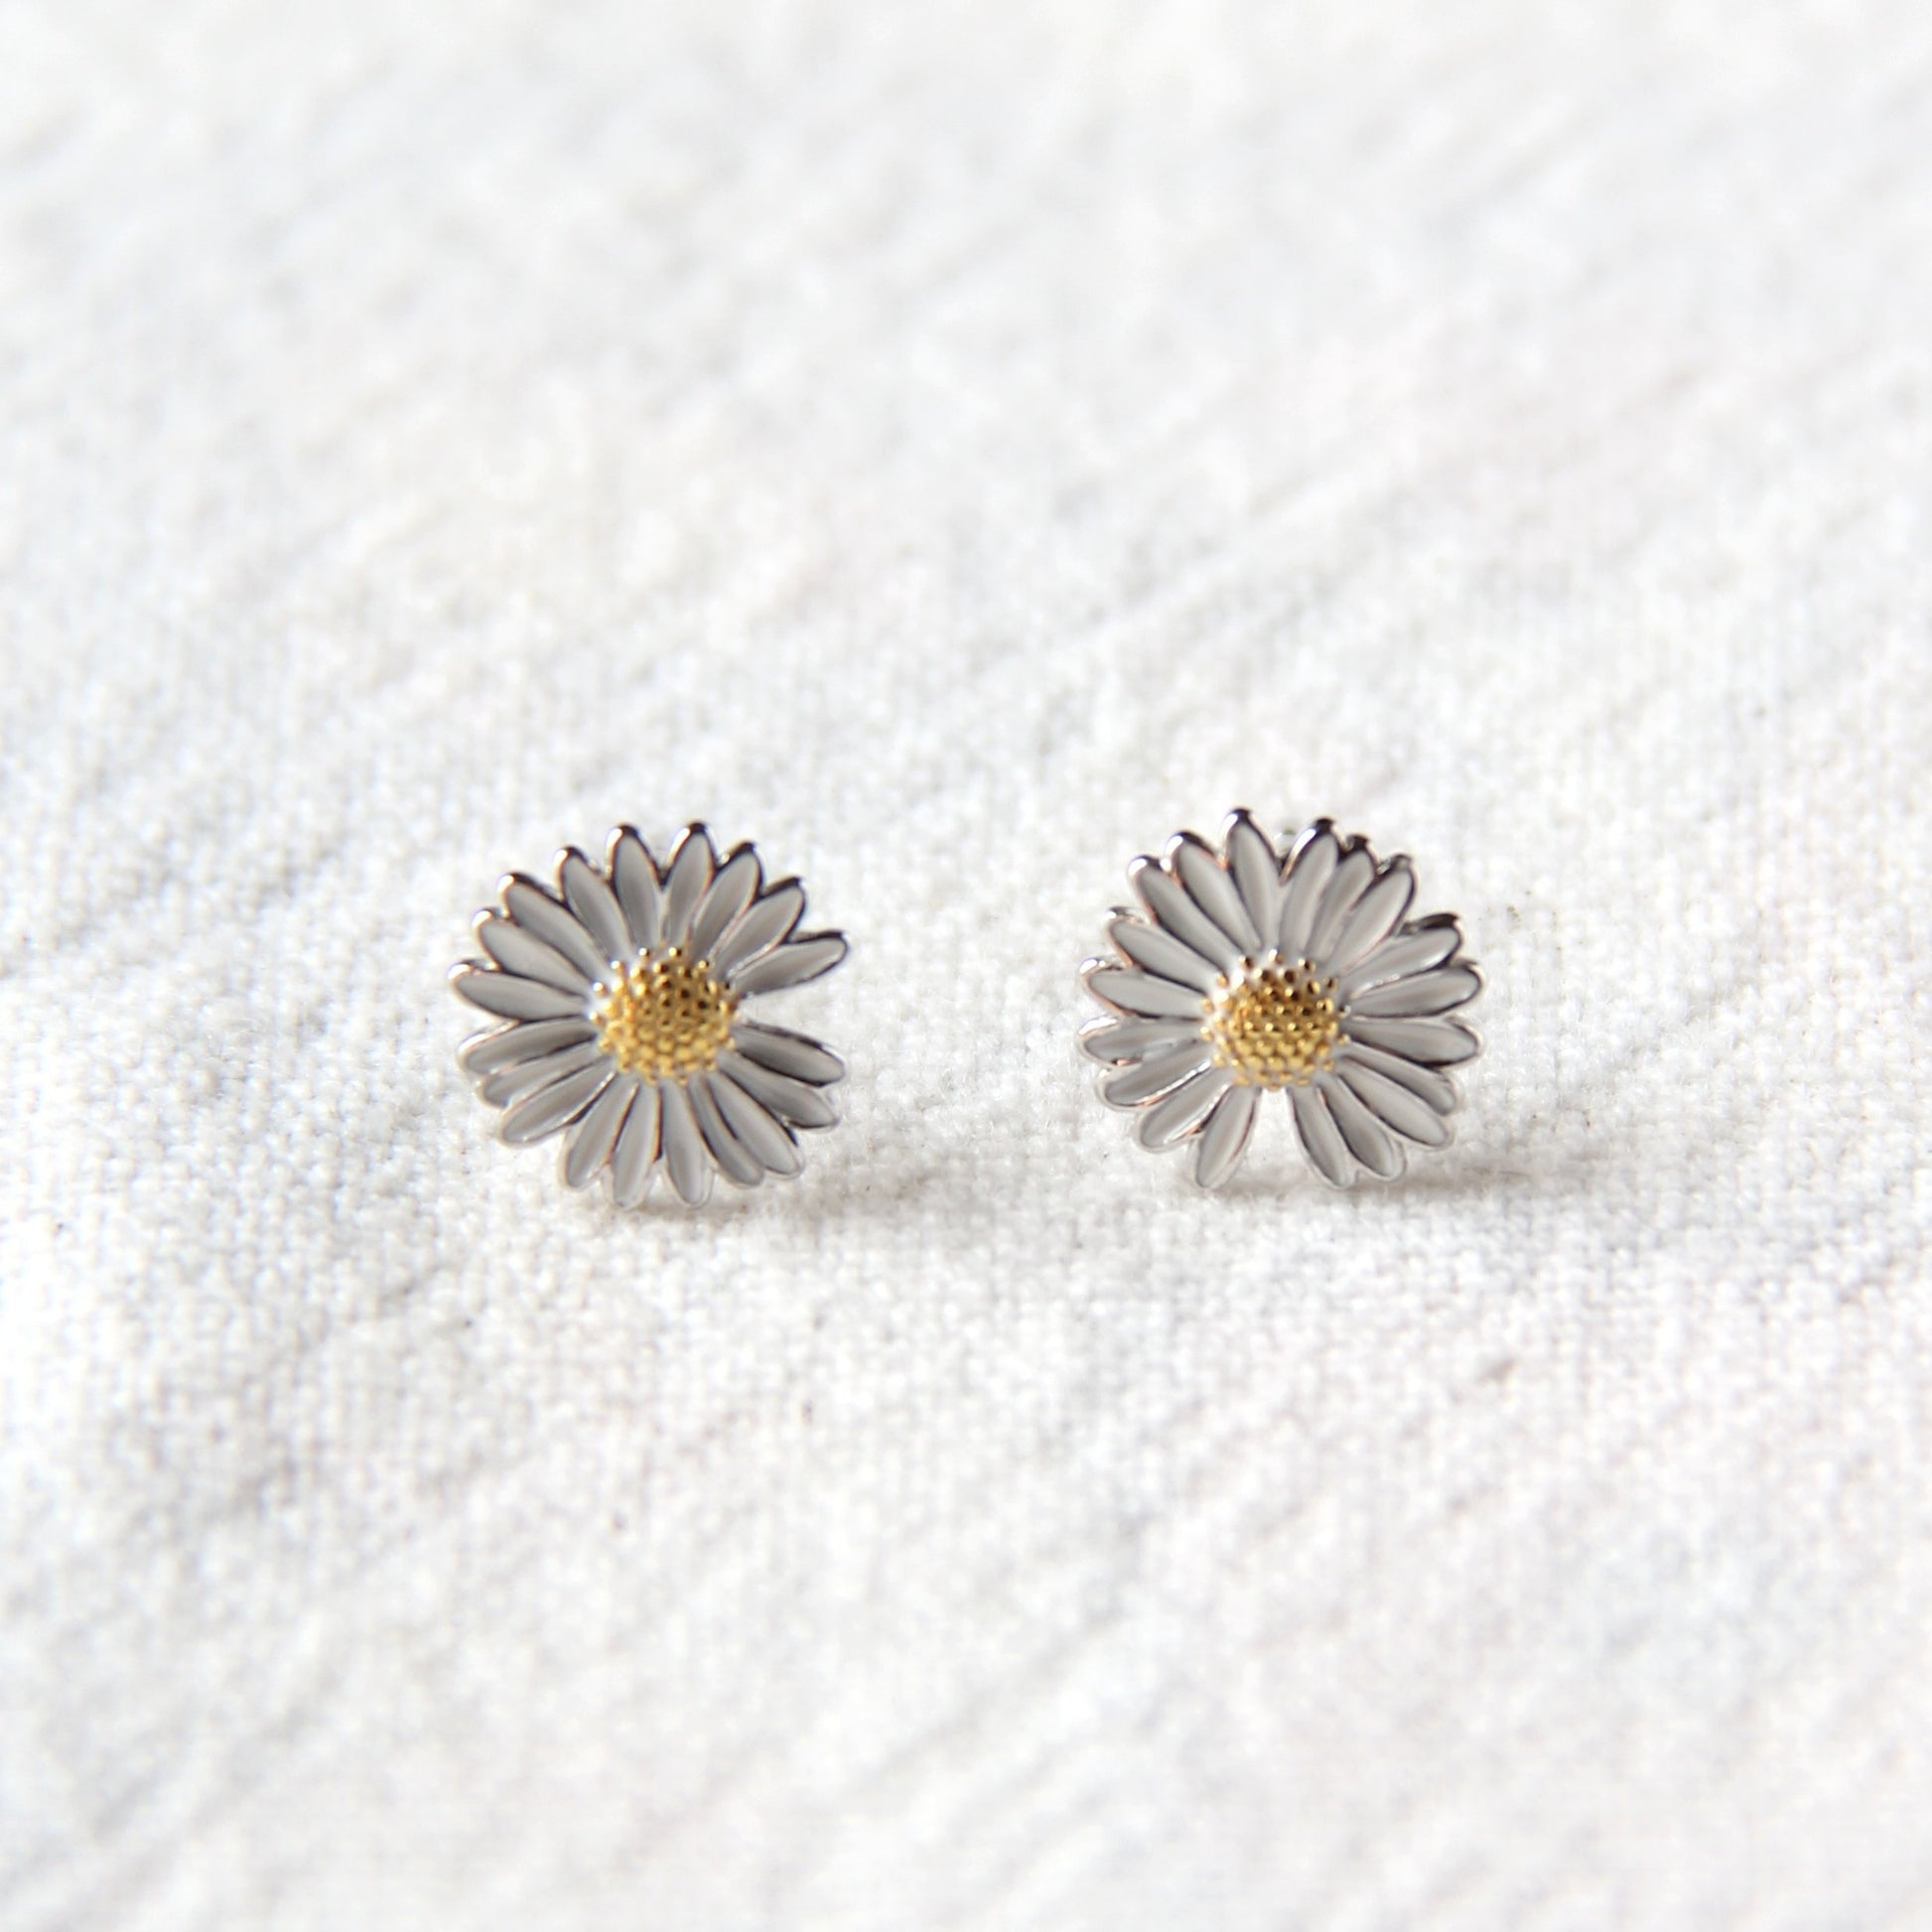 sterling silver daisy earrings with colored enamel. post closure.